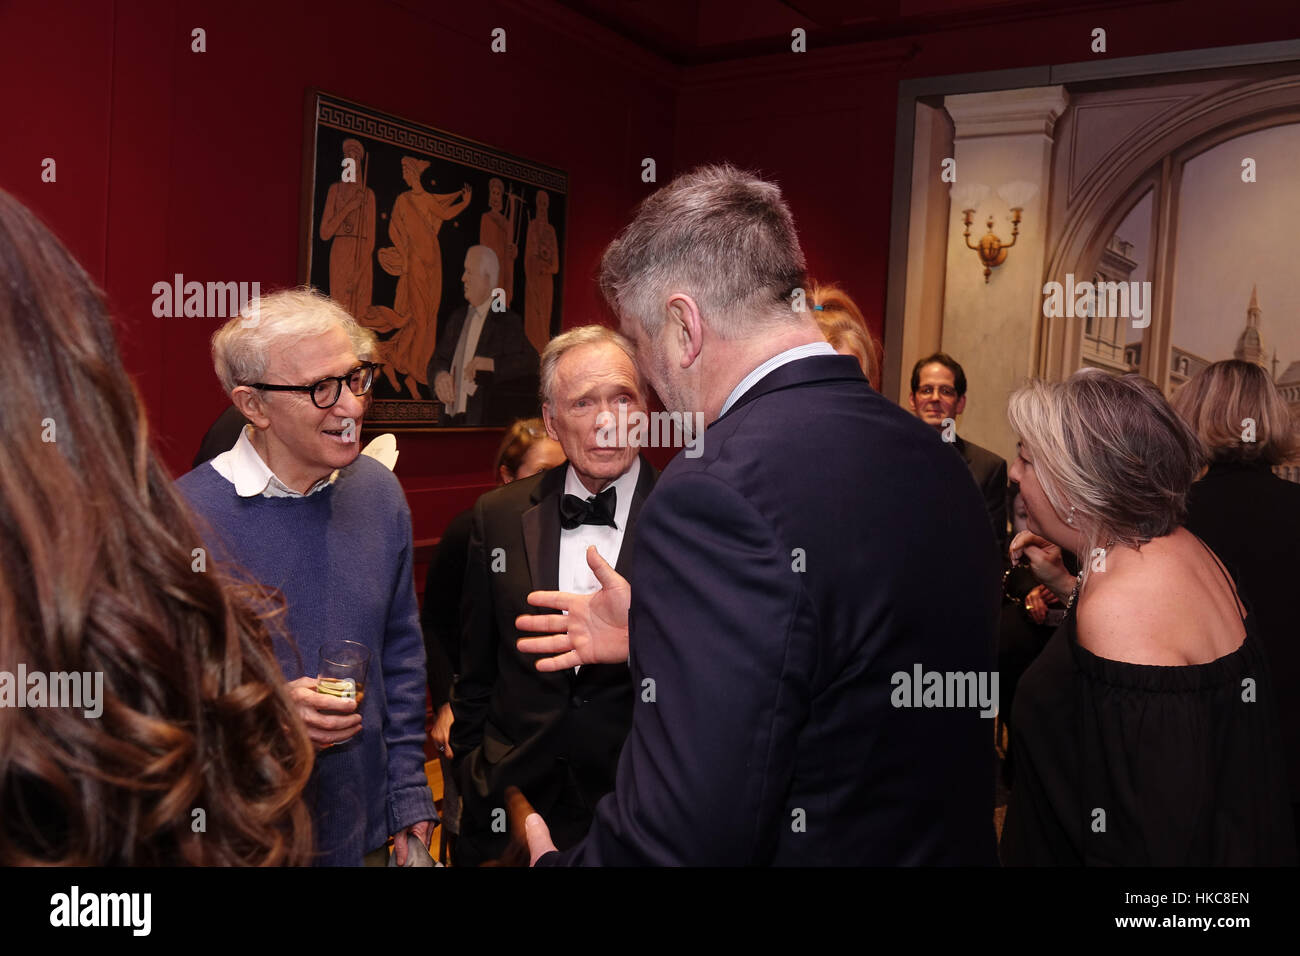 NEW YORK, NY - Woody Allen, Dick Cavett and Alec Baldwin at Dick Cavett's Birthday Celebration at a private club Stock Photo